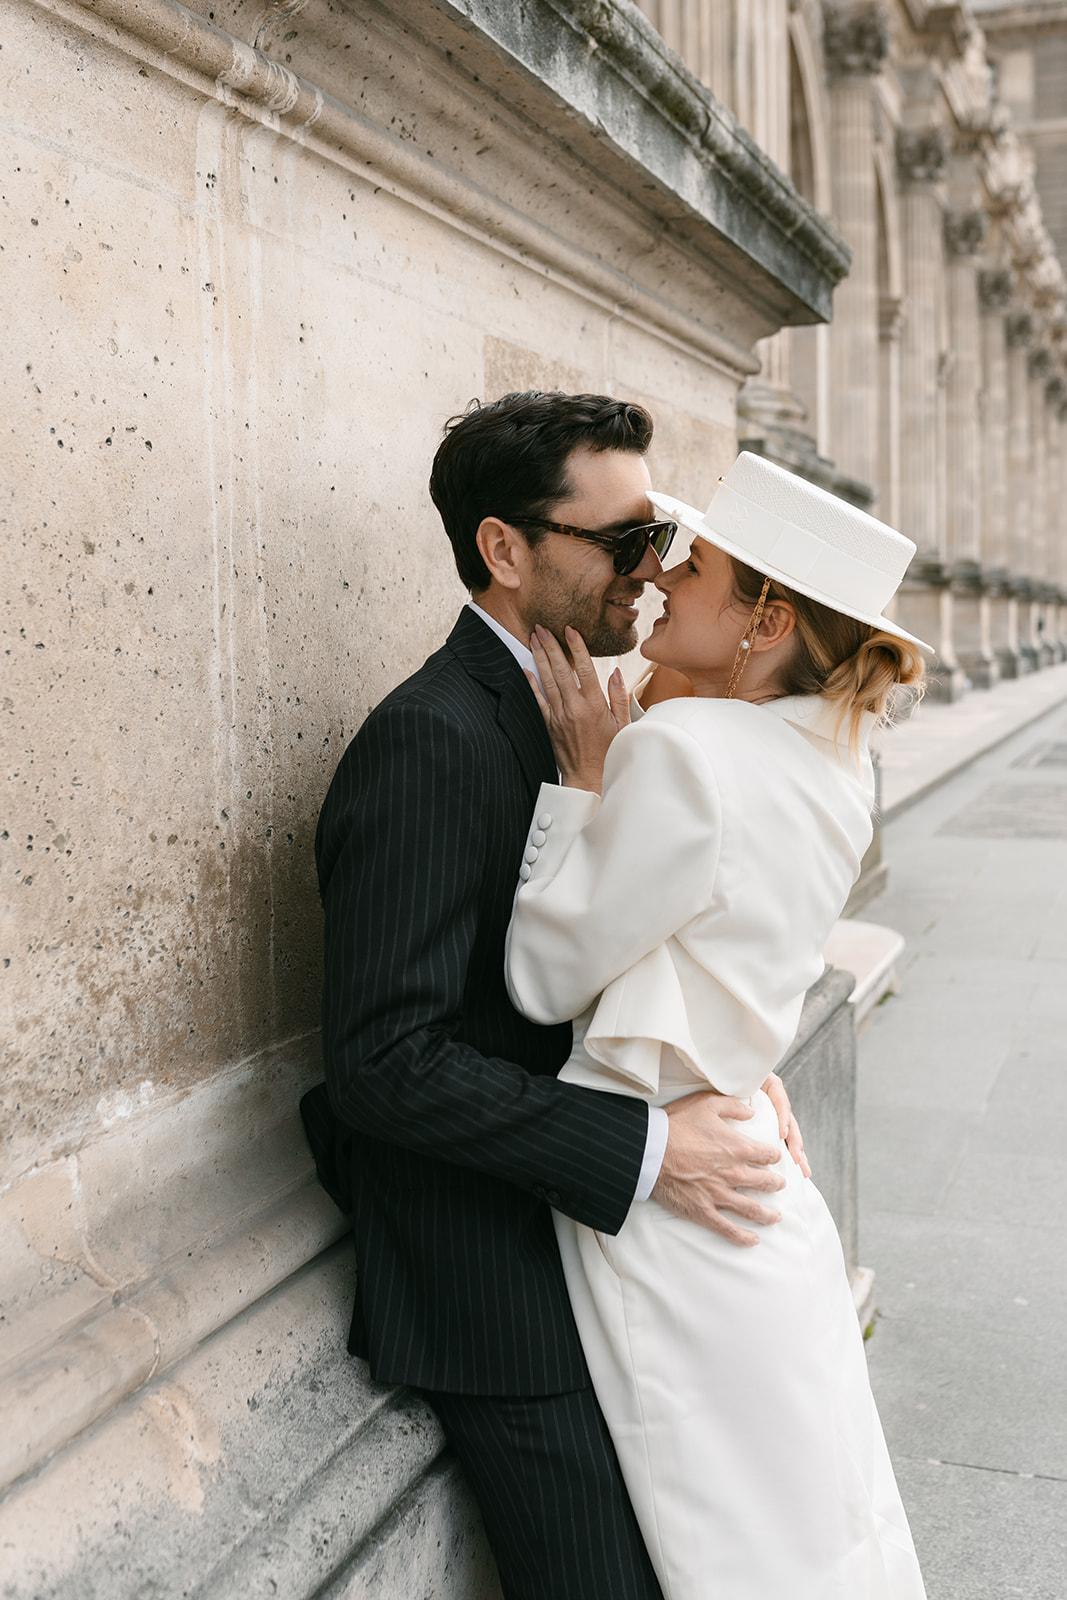 Sophisticated elegant french couple embracing each other at the Louvre in Paris